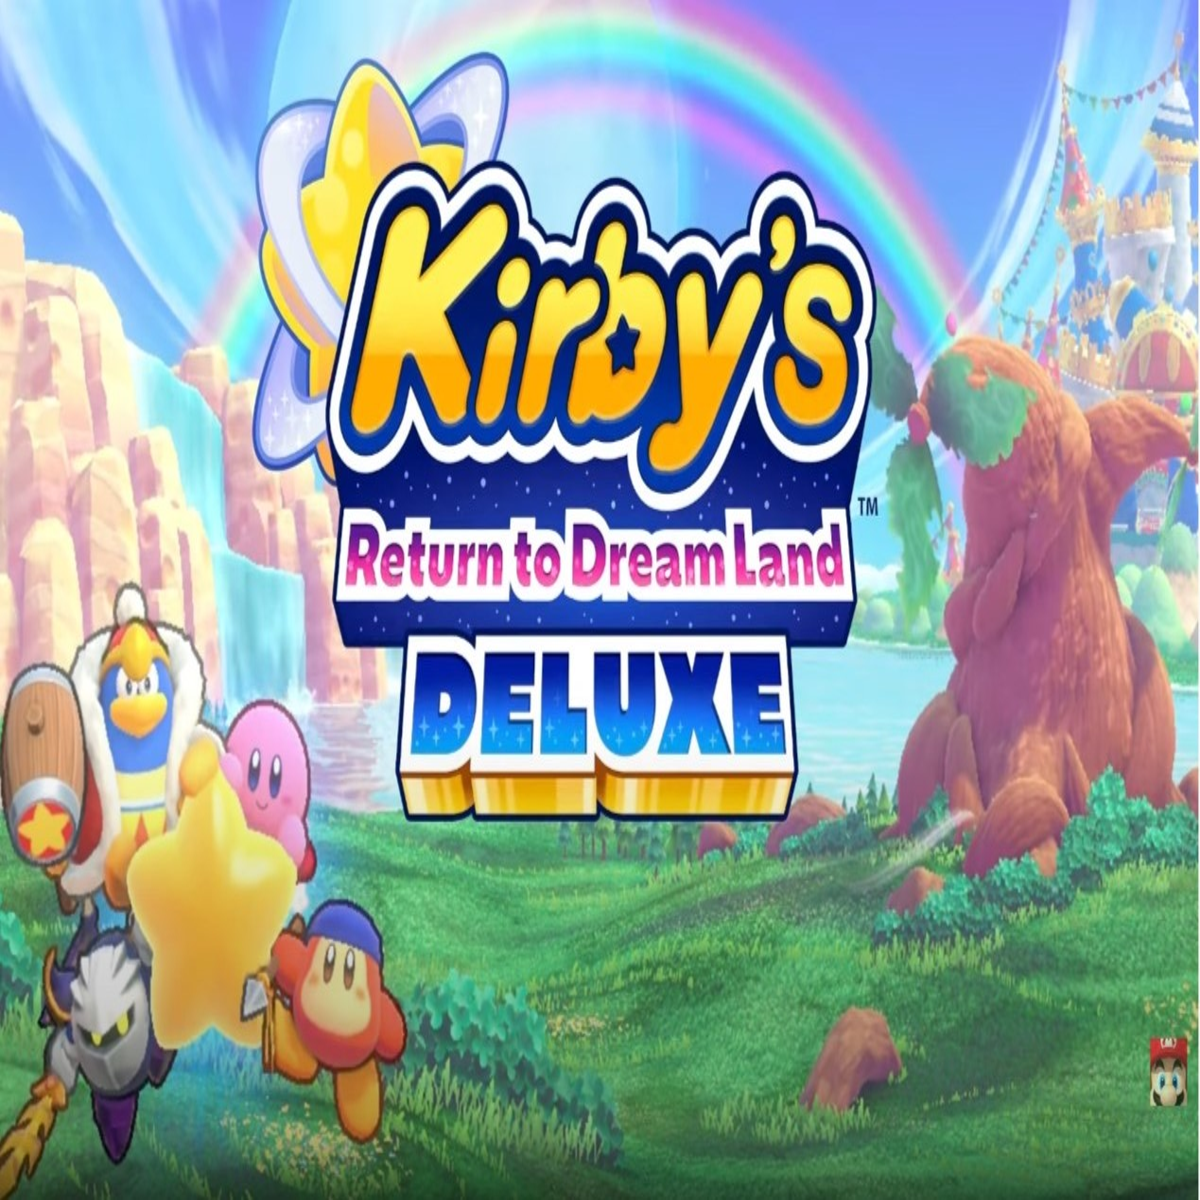 Kirby's Return to Dream Land Deluxe announced for February 2023 |  